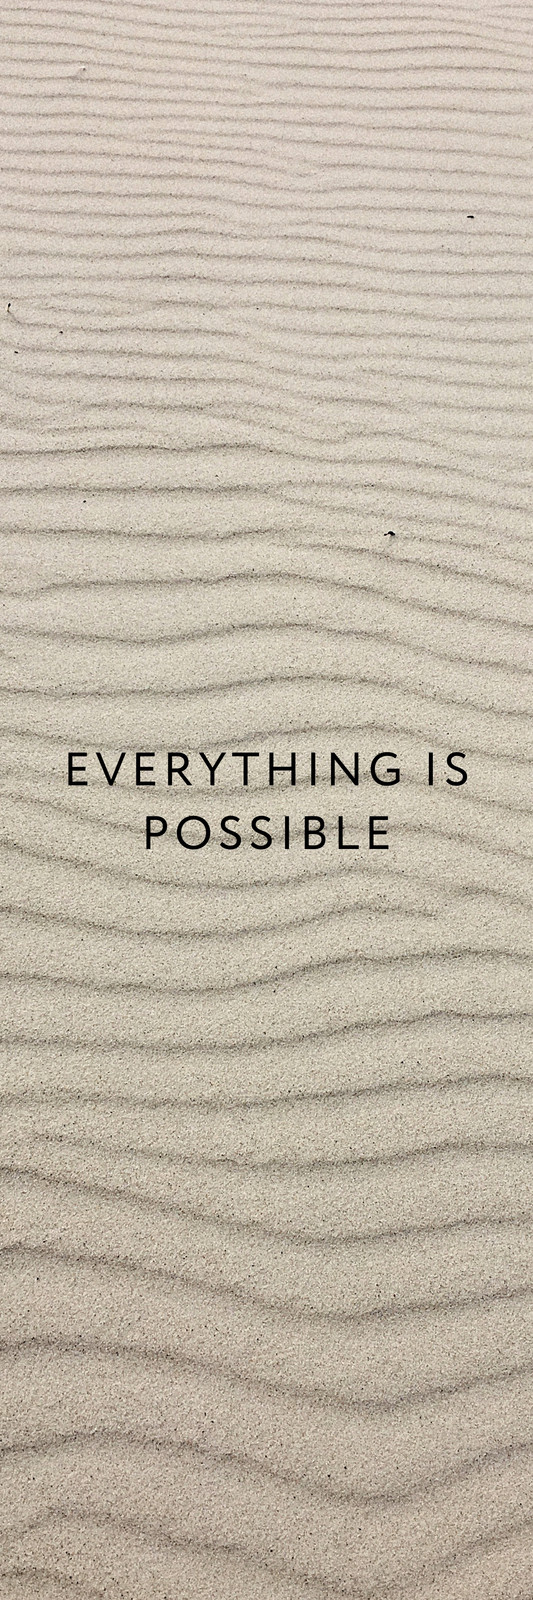 Everything is possible | You can do it quotes, Inspirational quotes  background, Motivational quotes wallpaper